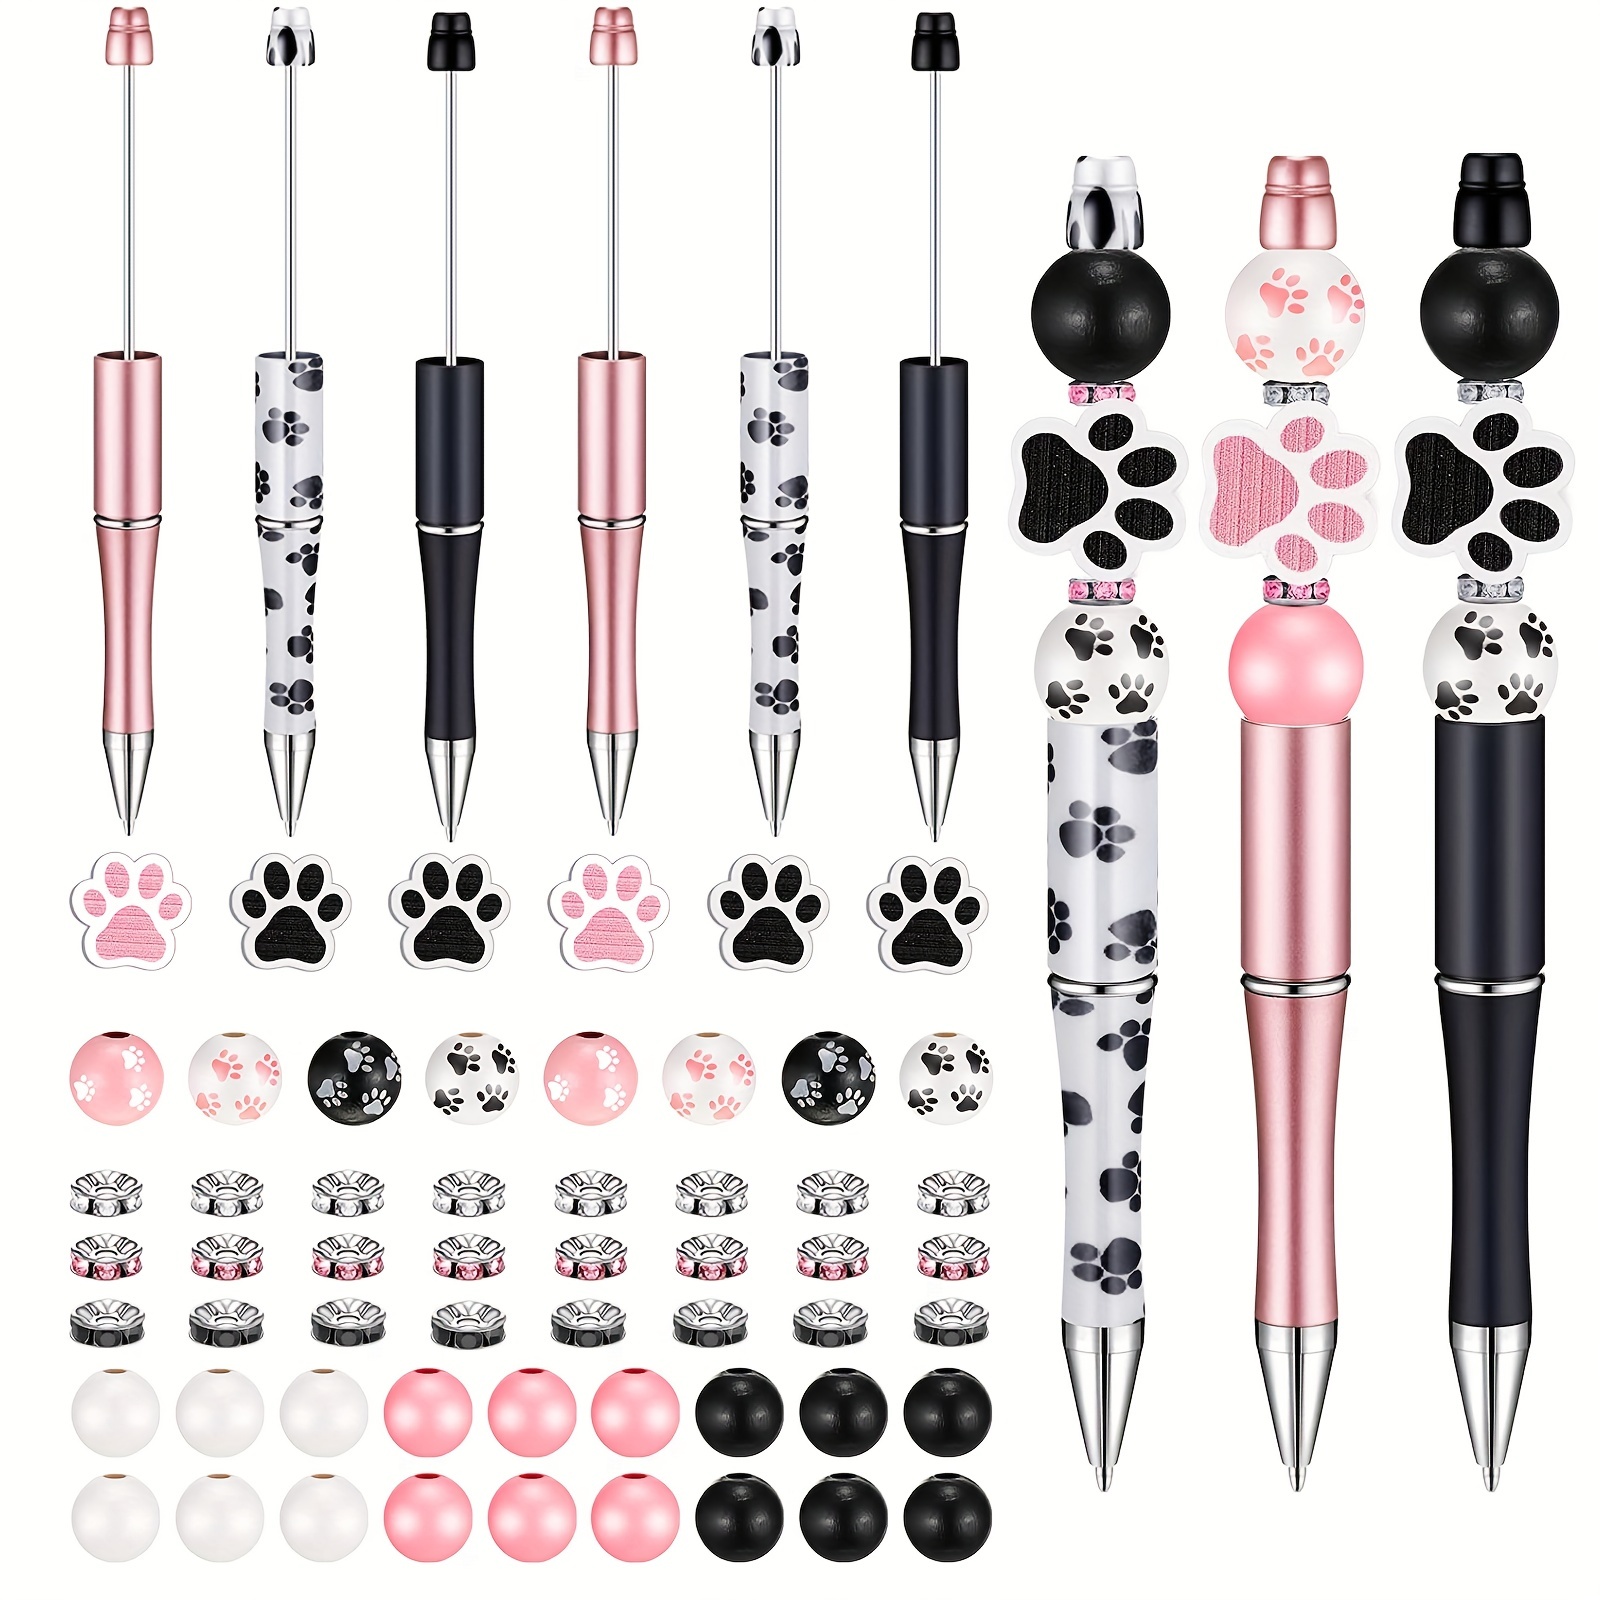 Planet Pens Dog Novelty Pen - Cute, Fun and Unique Kid and Adult Office Supplies Ballpoint Pen, Colorful Dog Writing Instrument for Cool Stationery